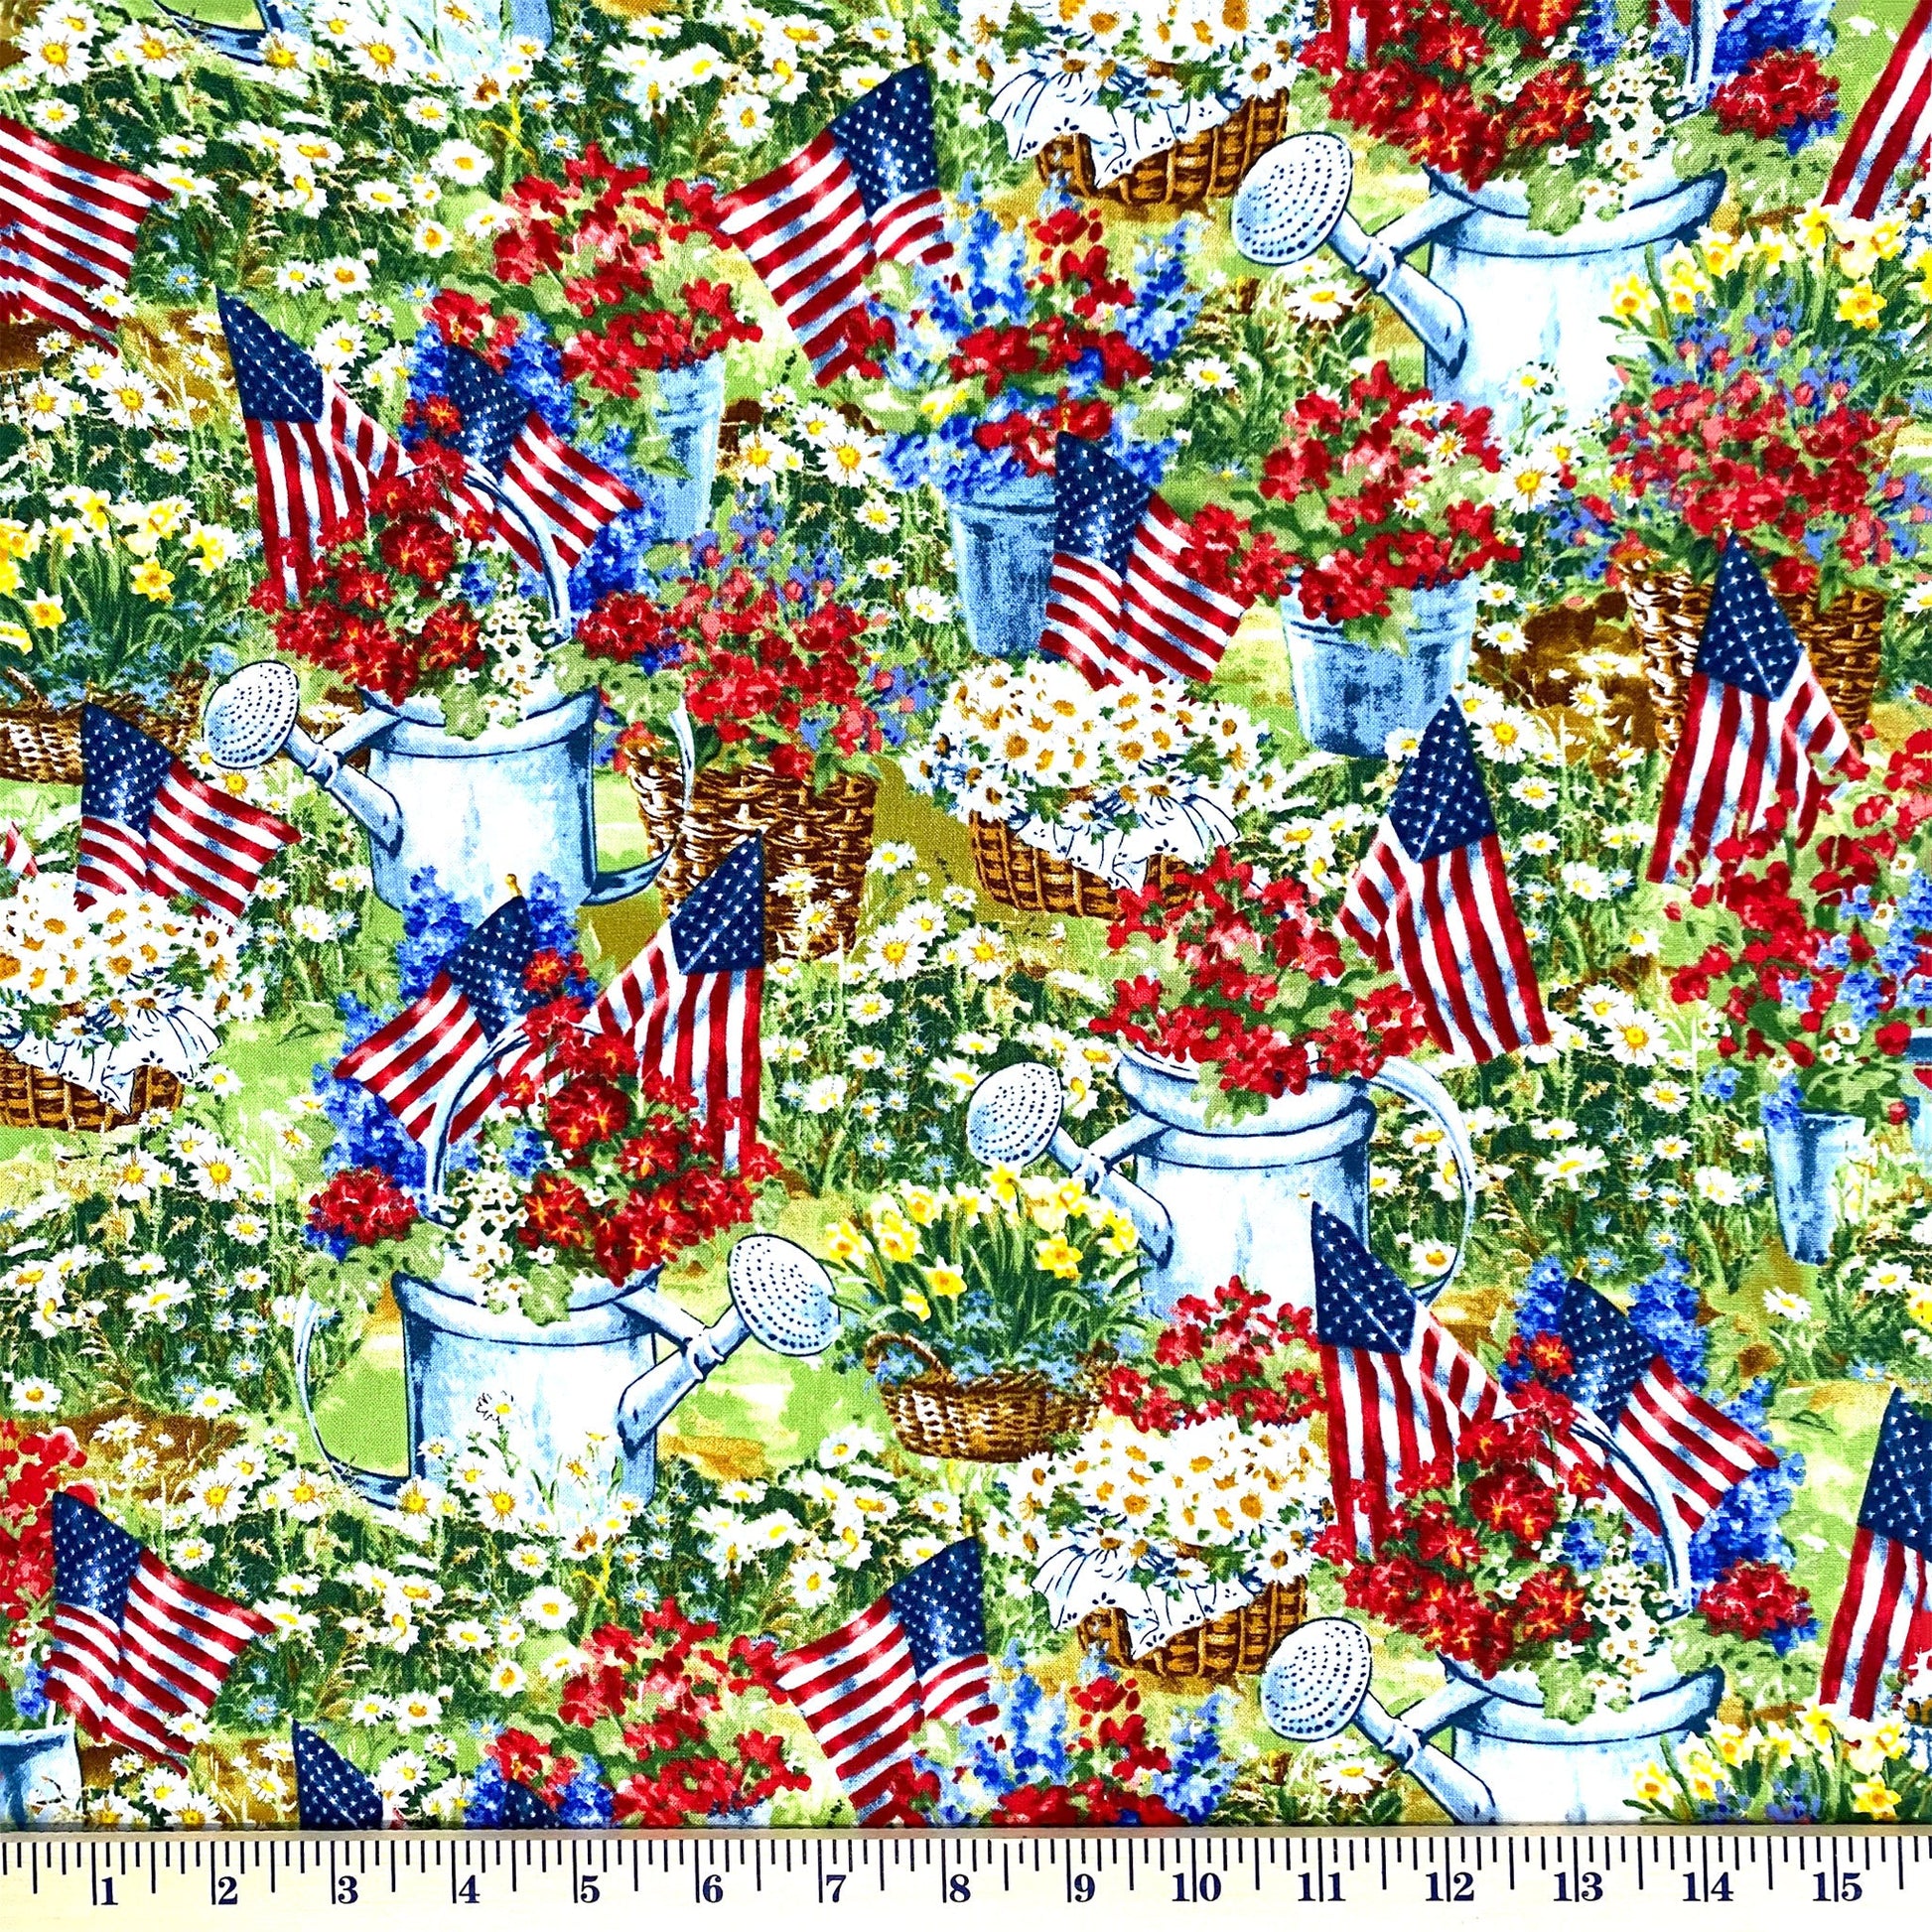 Patriotic Garden (C7254) by Timeless Treasures is a an allover floral and American flag print. The baskets of summer flowers adorned with American flags remind us of the carefree summer in the land of freedom. Perfect for summer cushions, napkins, and table-runners, or use as a border or accent for our patterns Mega Stars and Star Cuddle Quilt. Stitcher's Joy